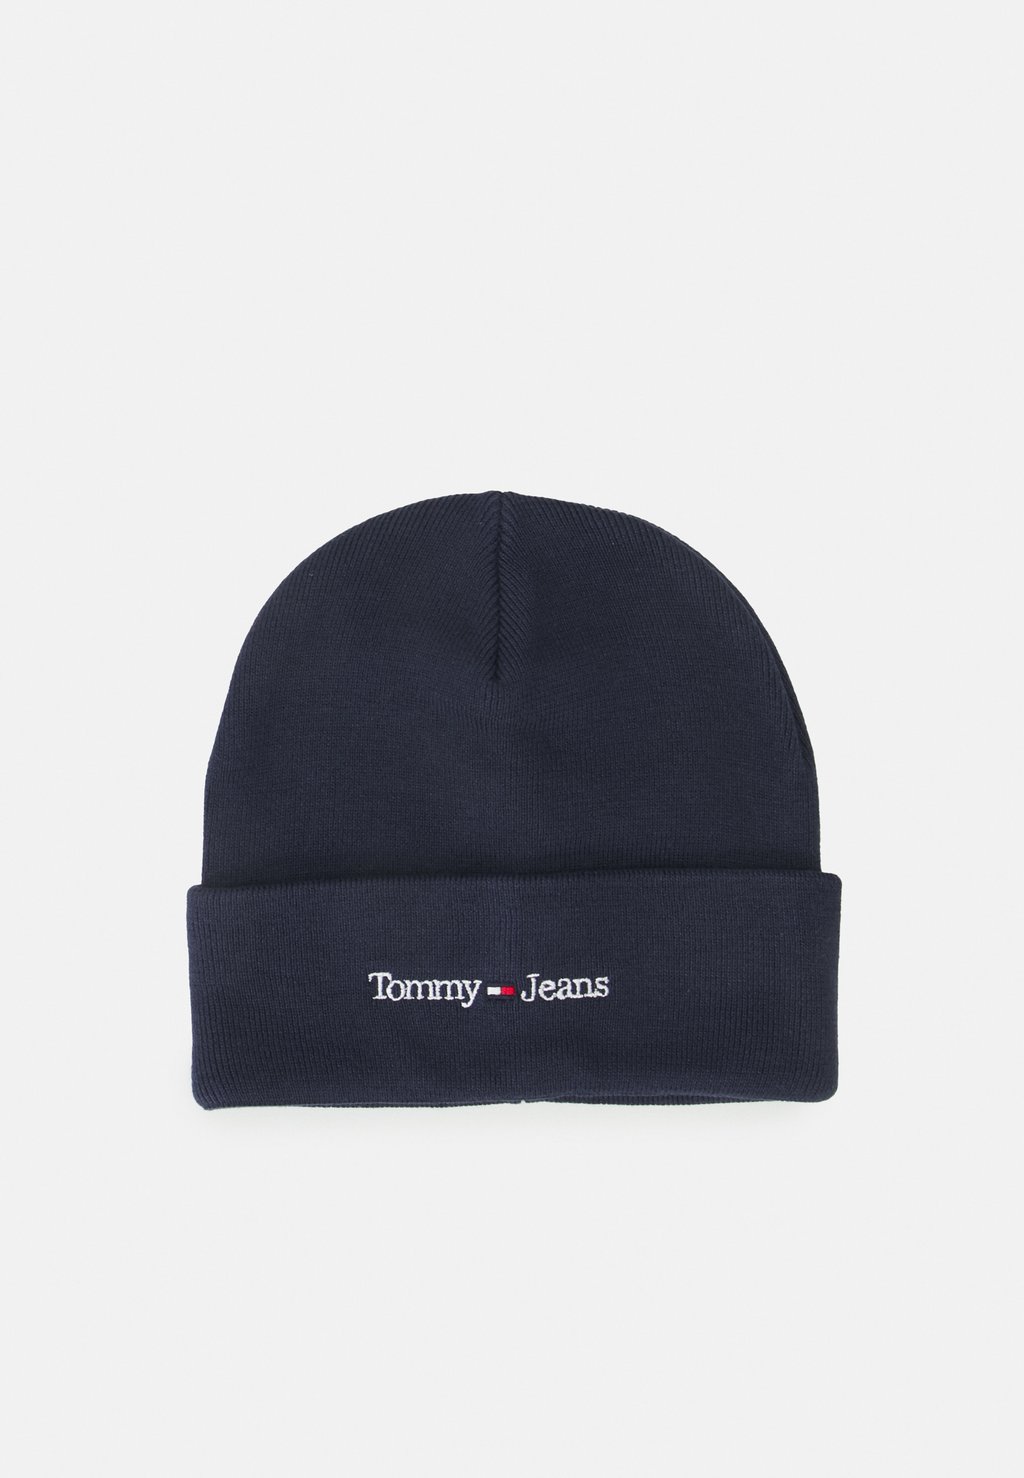 кроссовки tommy jeans core mix twilight navy Шапка Tommy Jeans